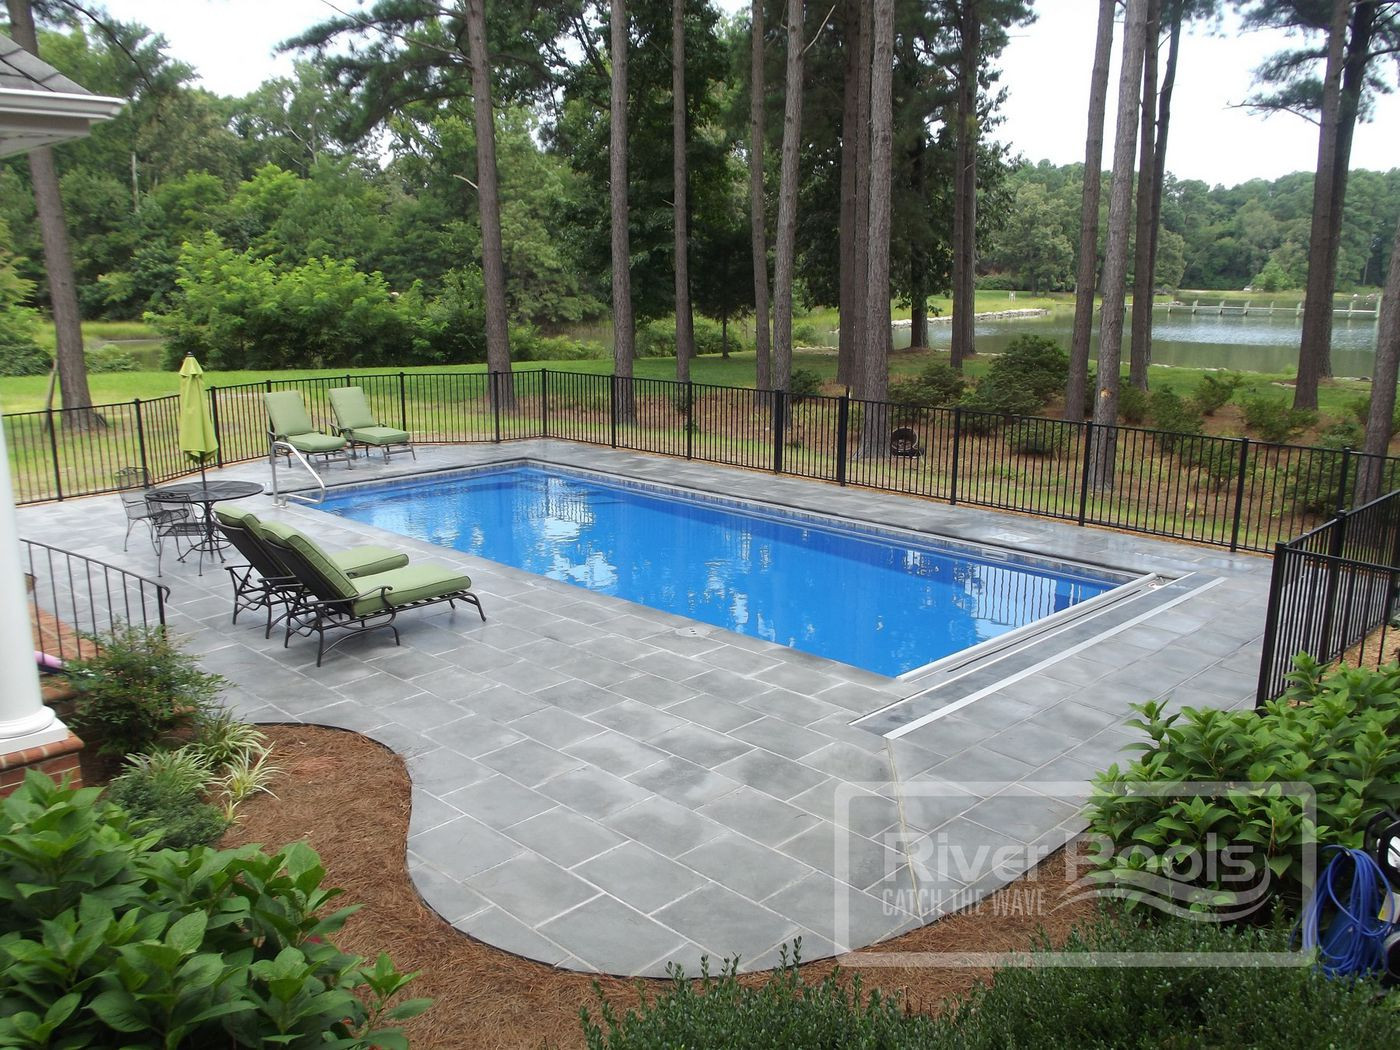 Pools For Small Backyard
 What is the Best Small Pool Design for a Small Yard